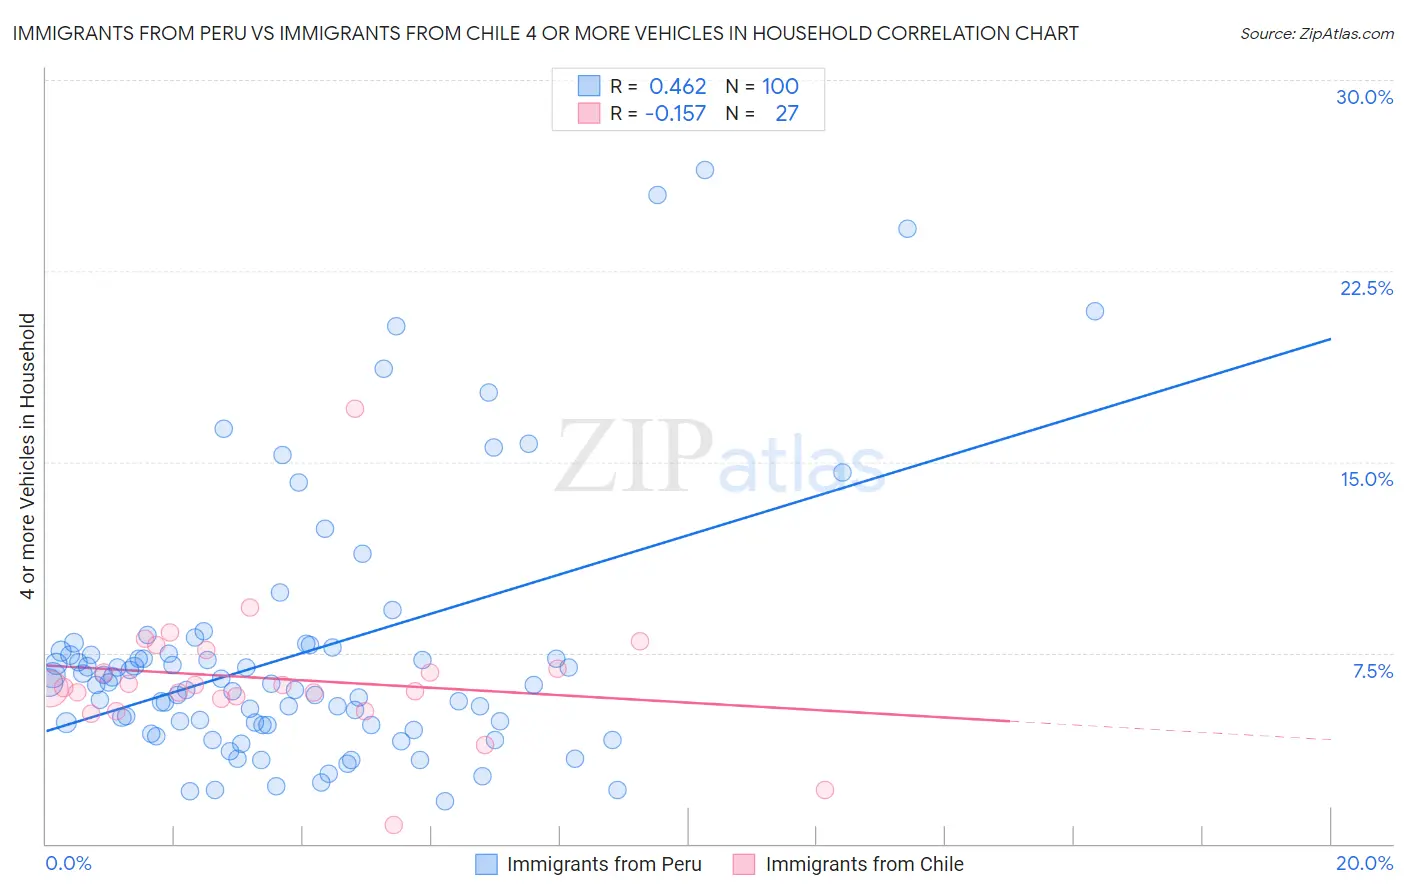 Immigrants from Peru vs Immigrants from Chile 4 or more Vehicles in Household